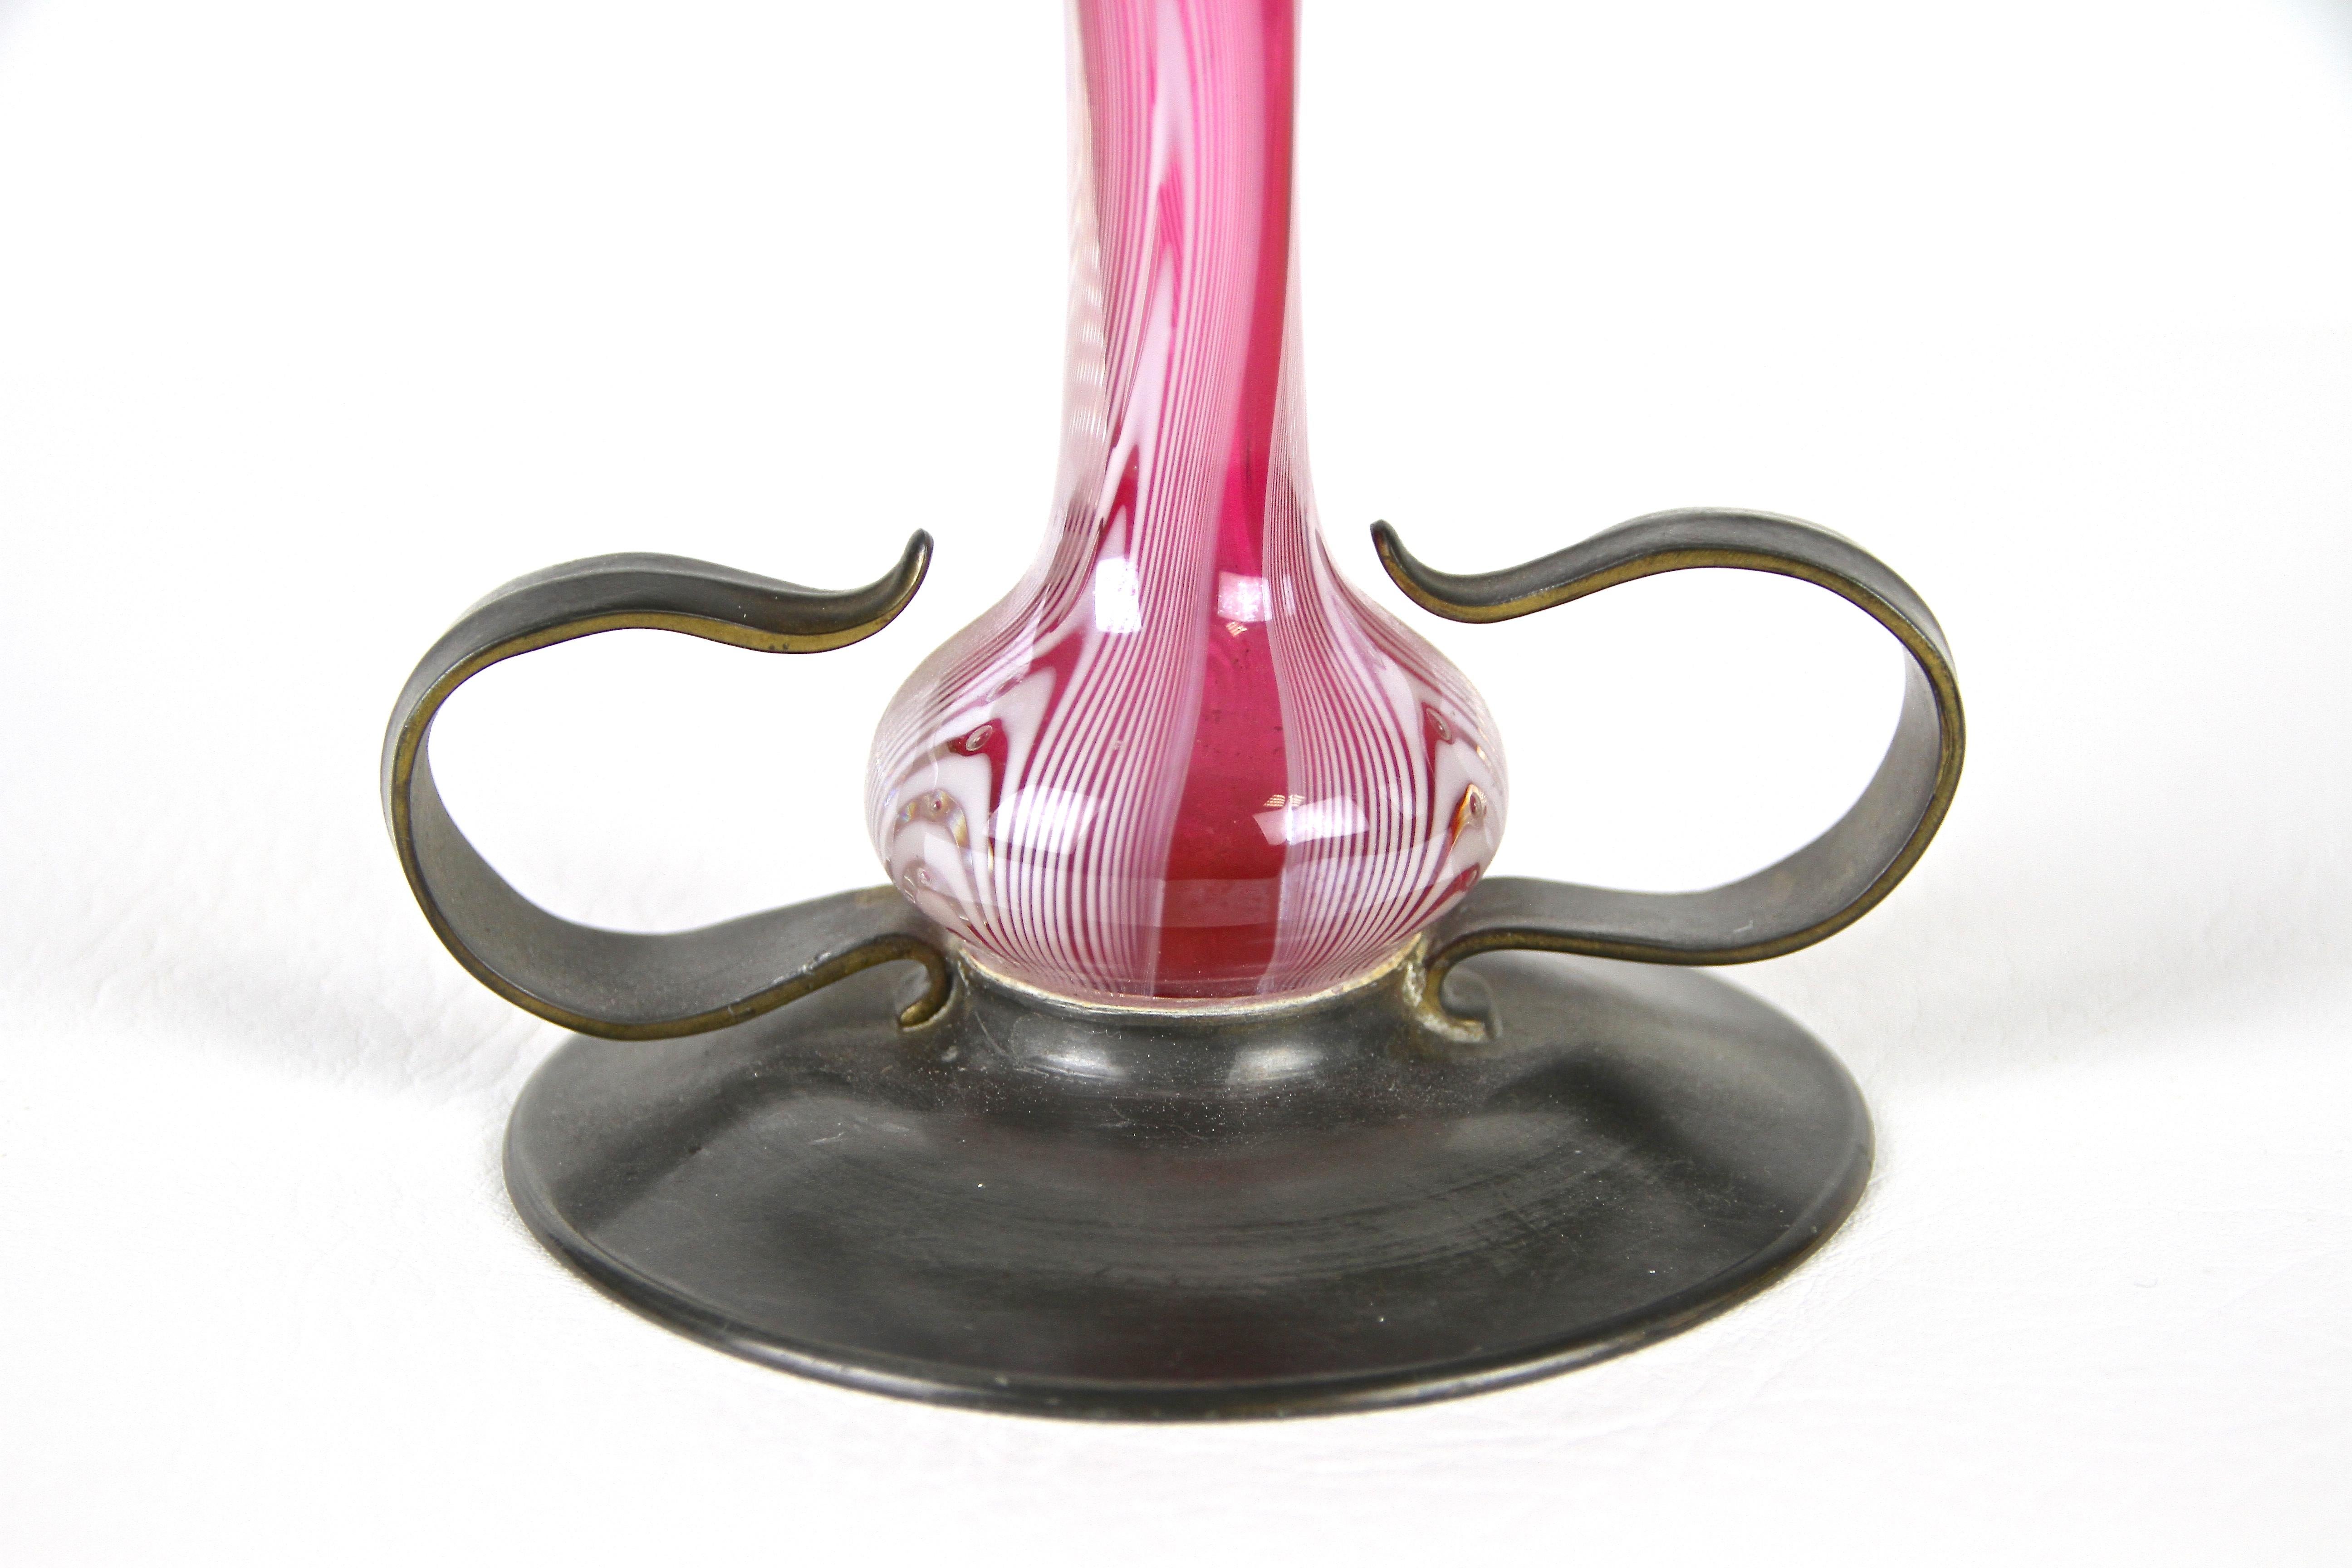 Beautiful Art Nouveau glass vase on brass stand out of Austria from the period around 1900. Mouth blown of pink glass and additionally adorned by delightful melted white glass threads, this extraordinary early 20th century glass vase impresses with